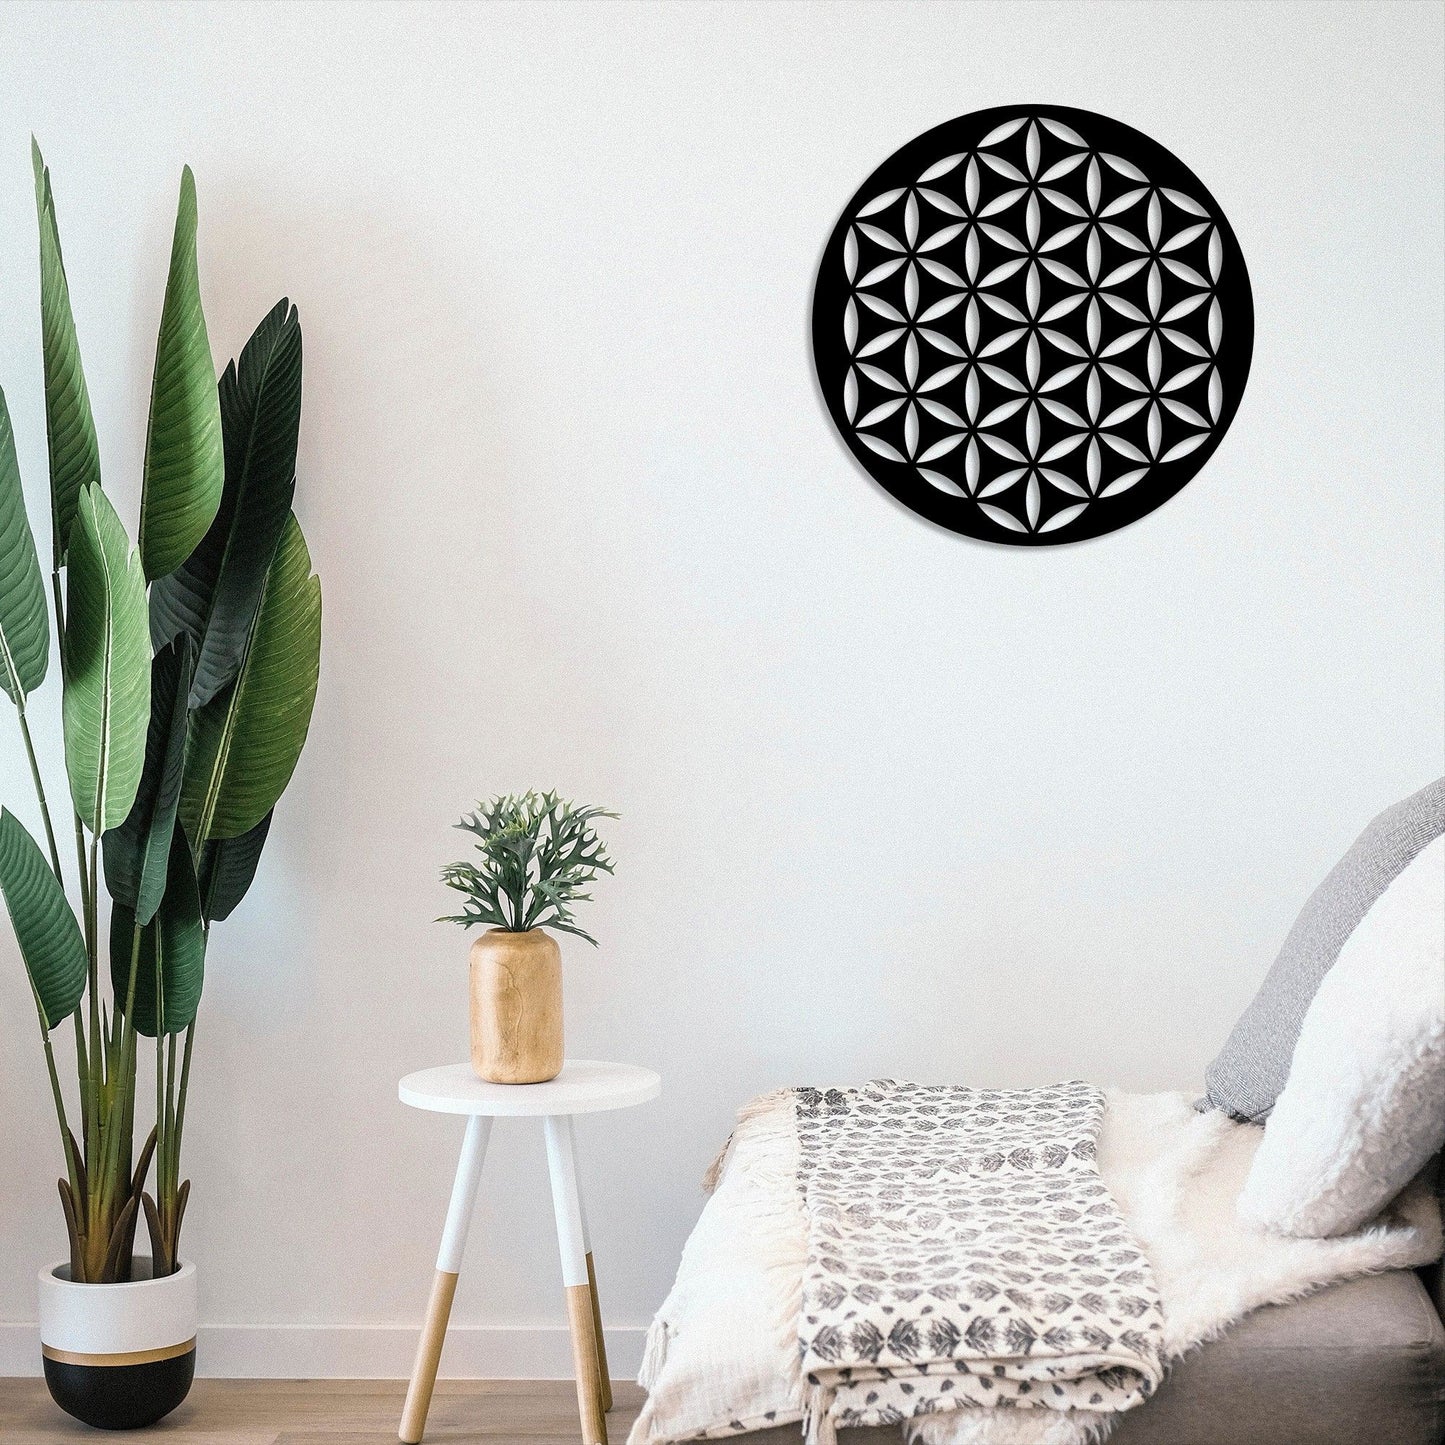 Flower Of Life 2 - Decorative Metal Wall Accessory